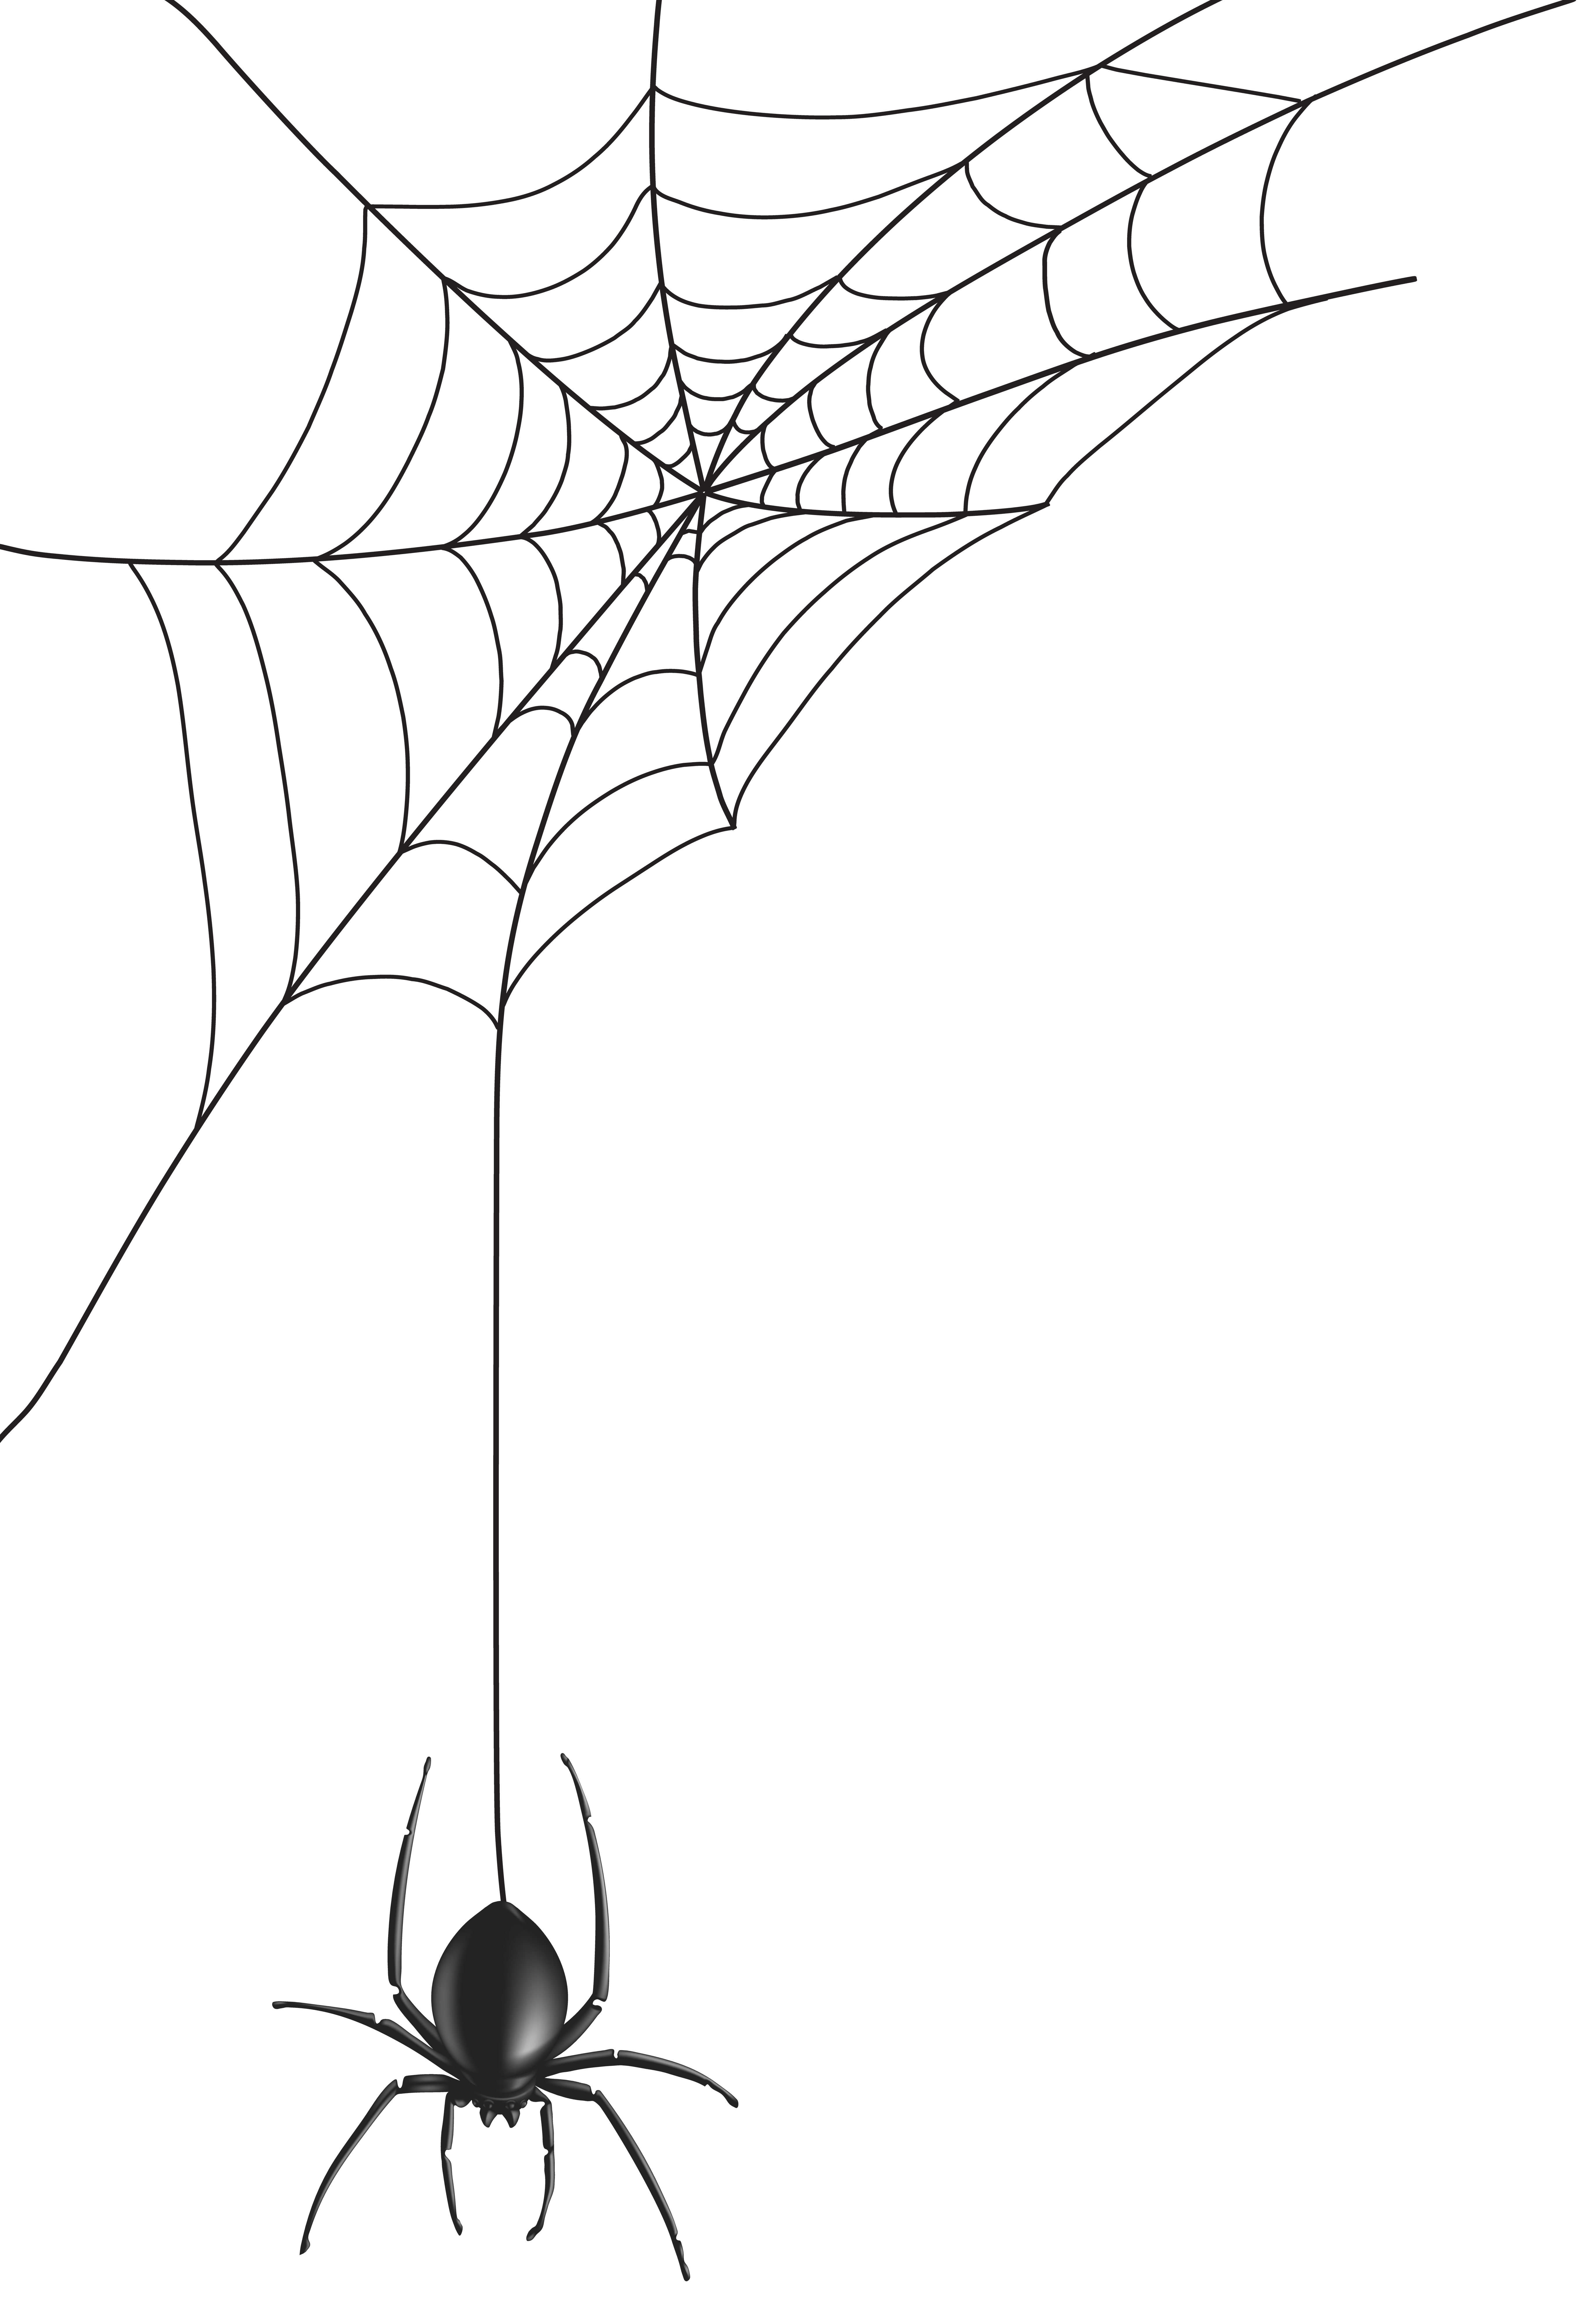 Spider Web PNG Clip Art Image | Gallery Yopriceville - High-Quality ...